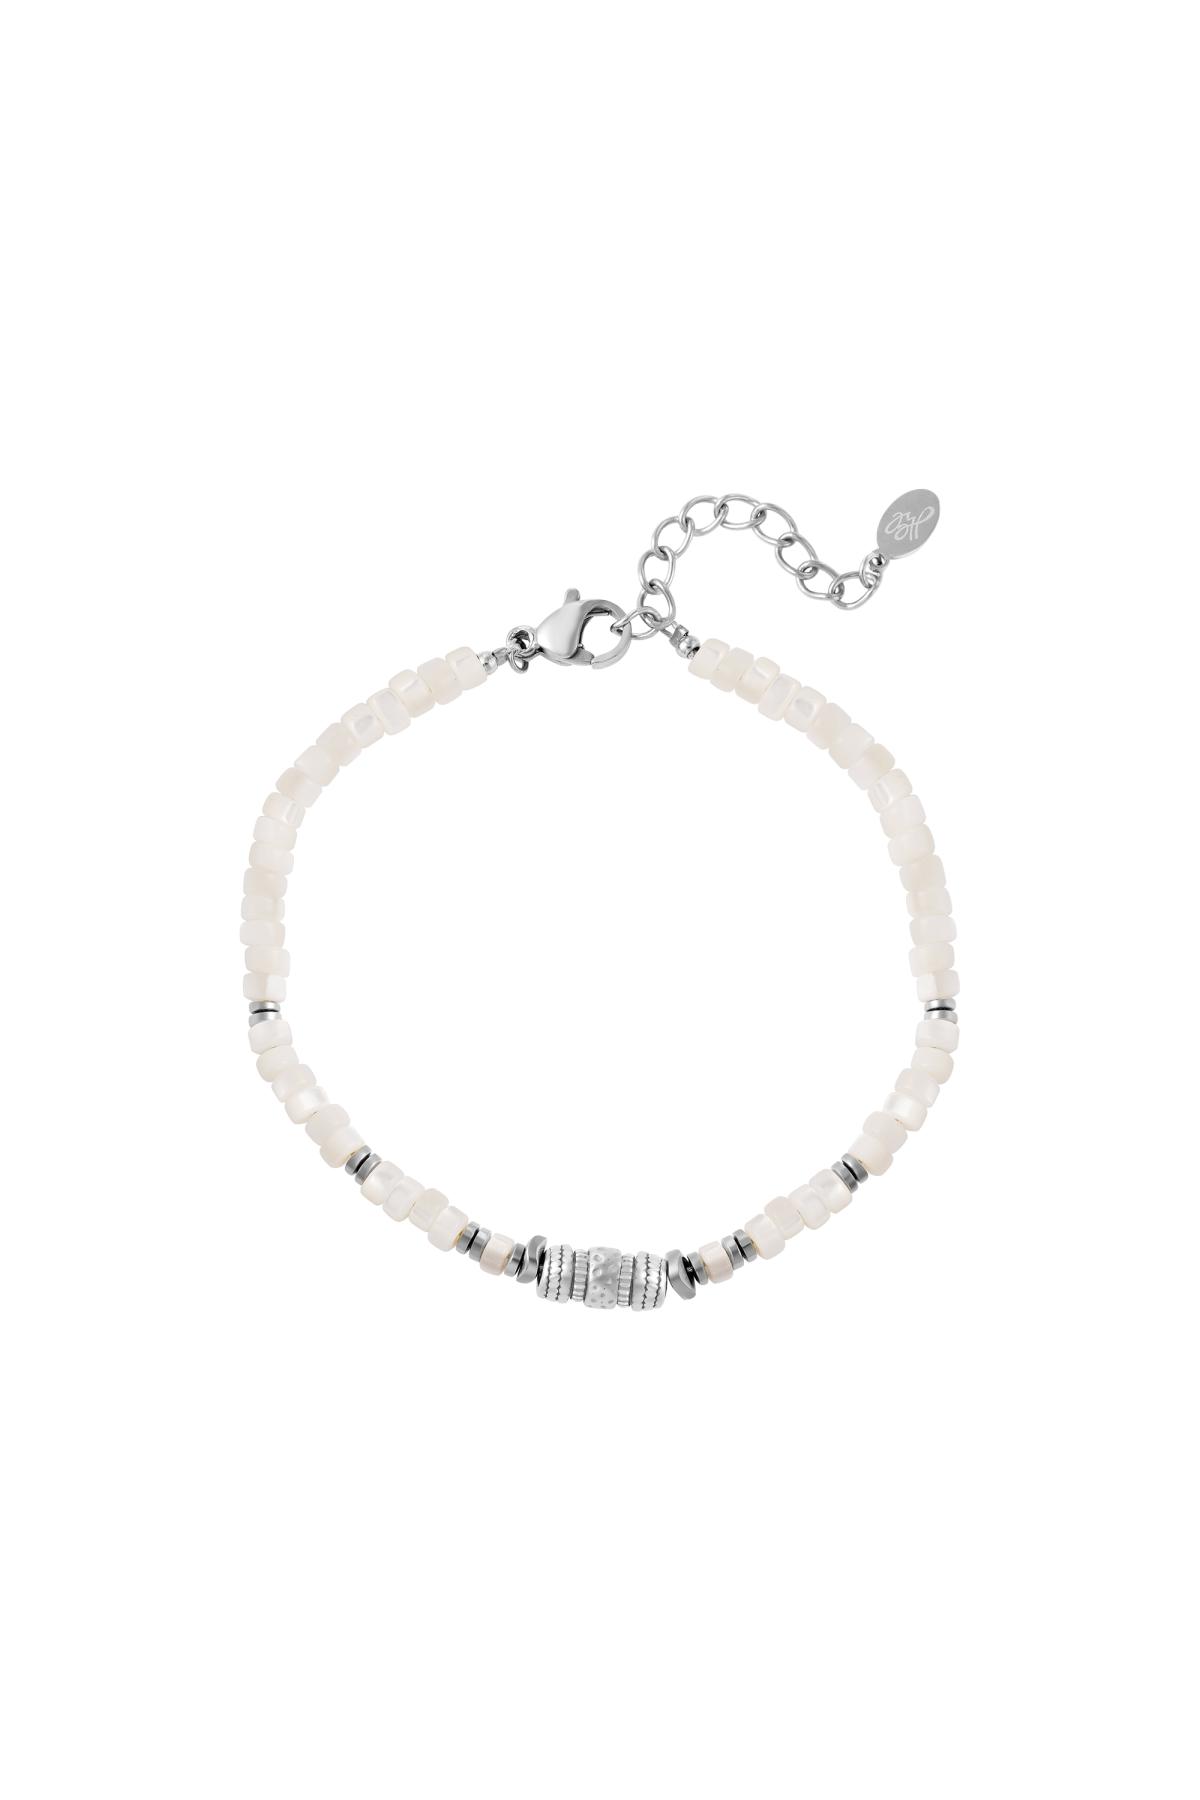 Bracelet with white beads Silver Stainless Steel h5 